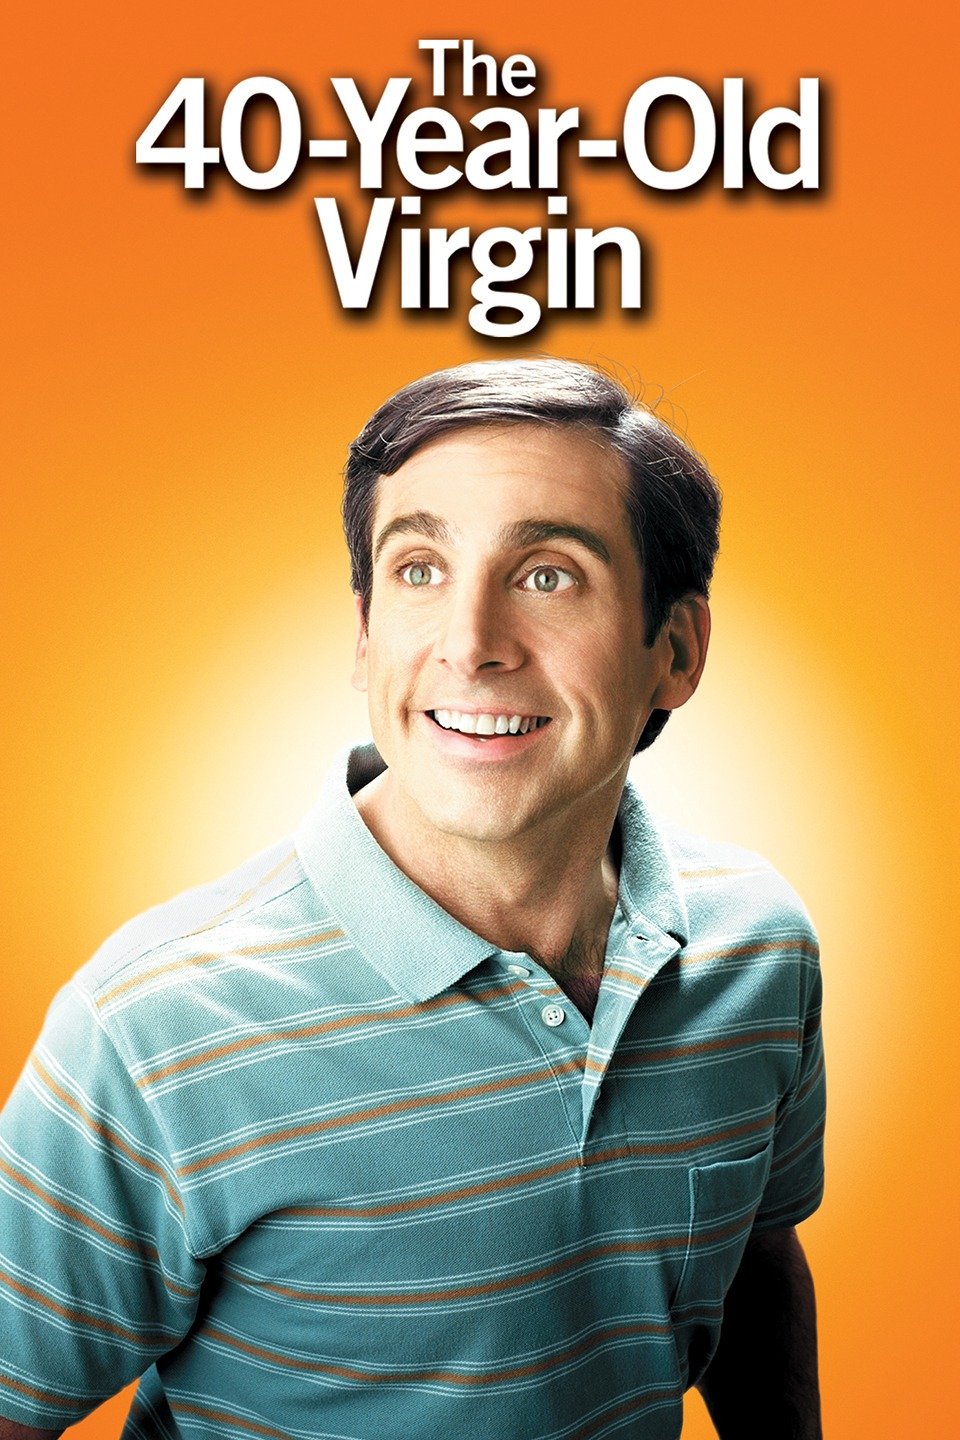 The 40-Year-Old Virgin pic